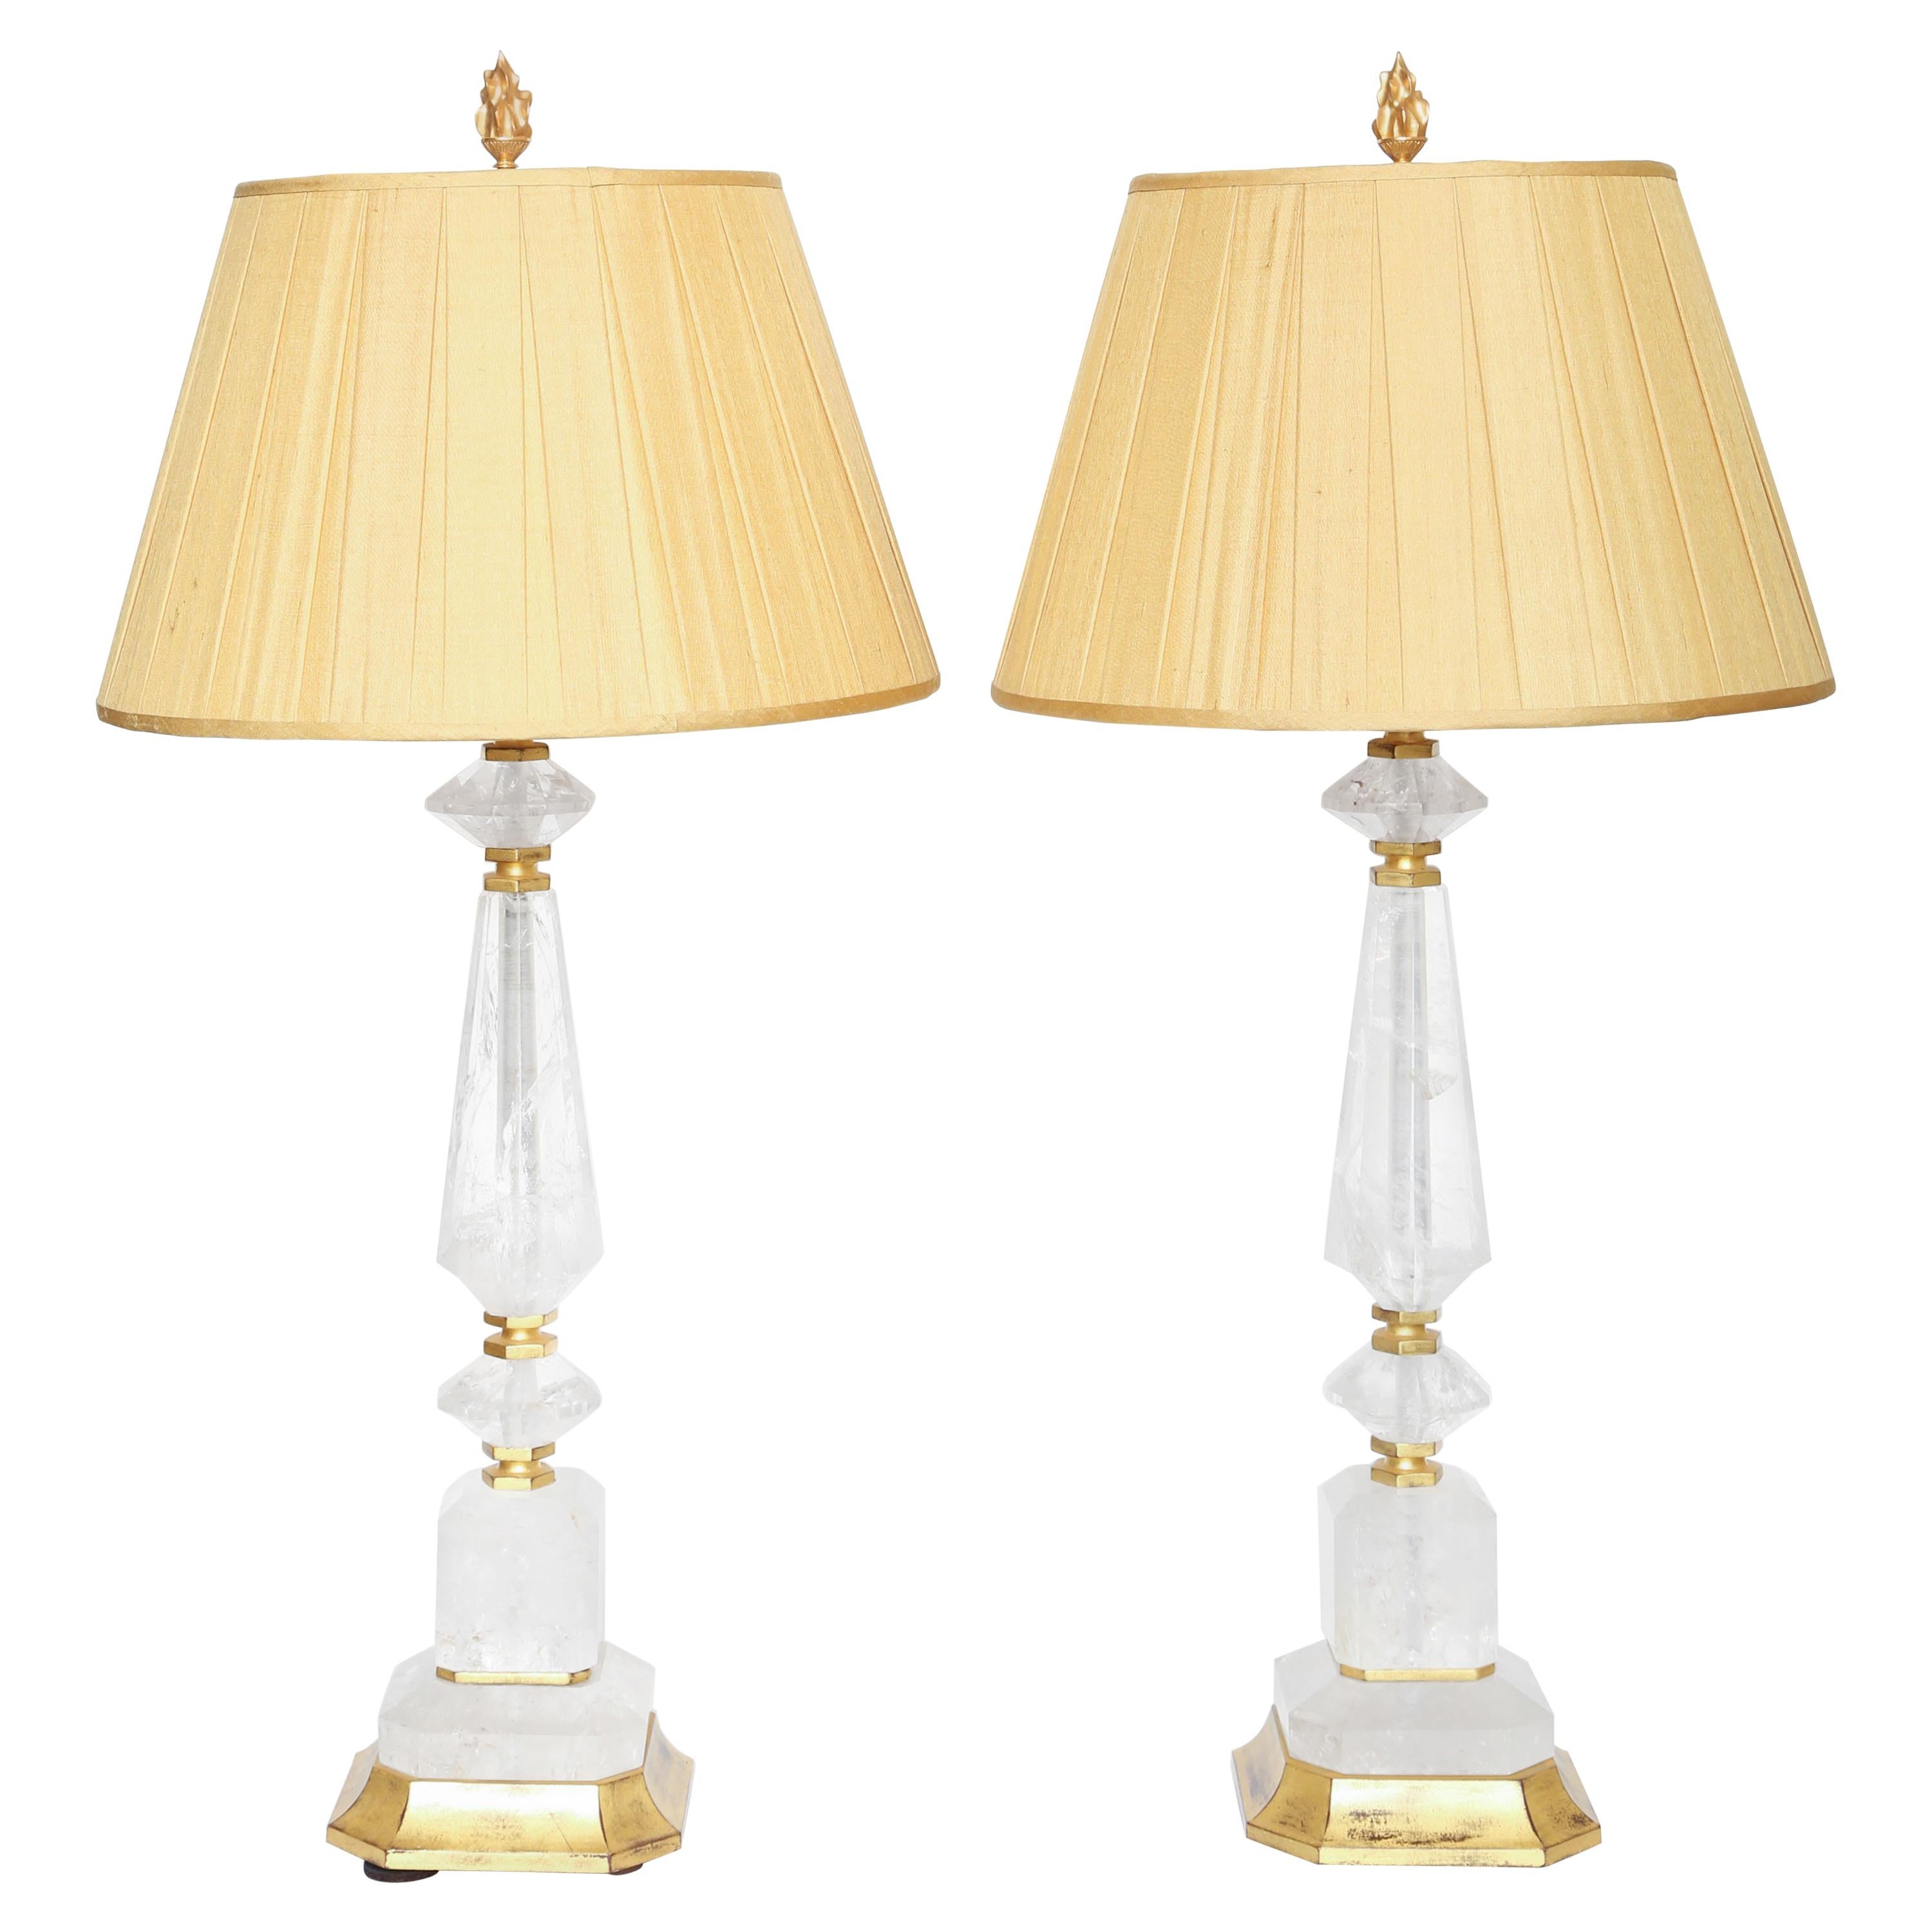 Fine Pair of Geometric-Shaped Rock Crystal and Giltwood Lamps (Shades separate)